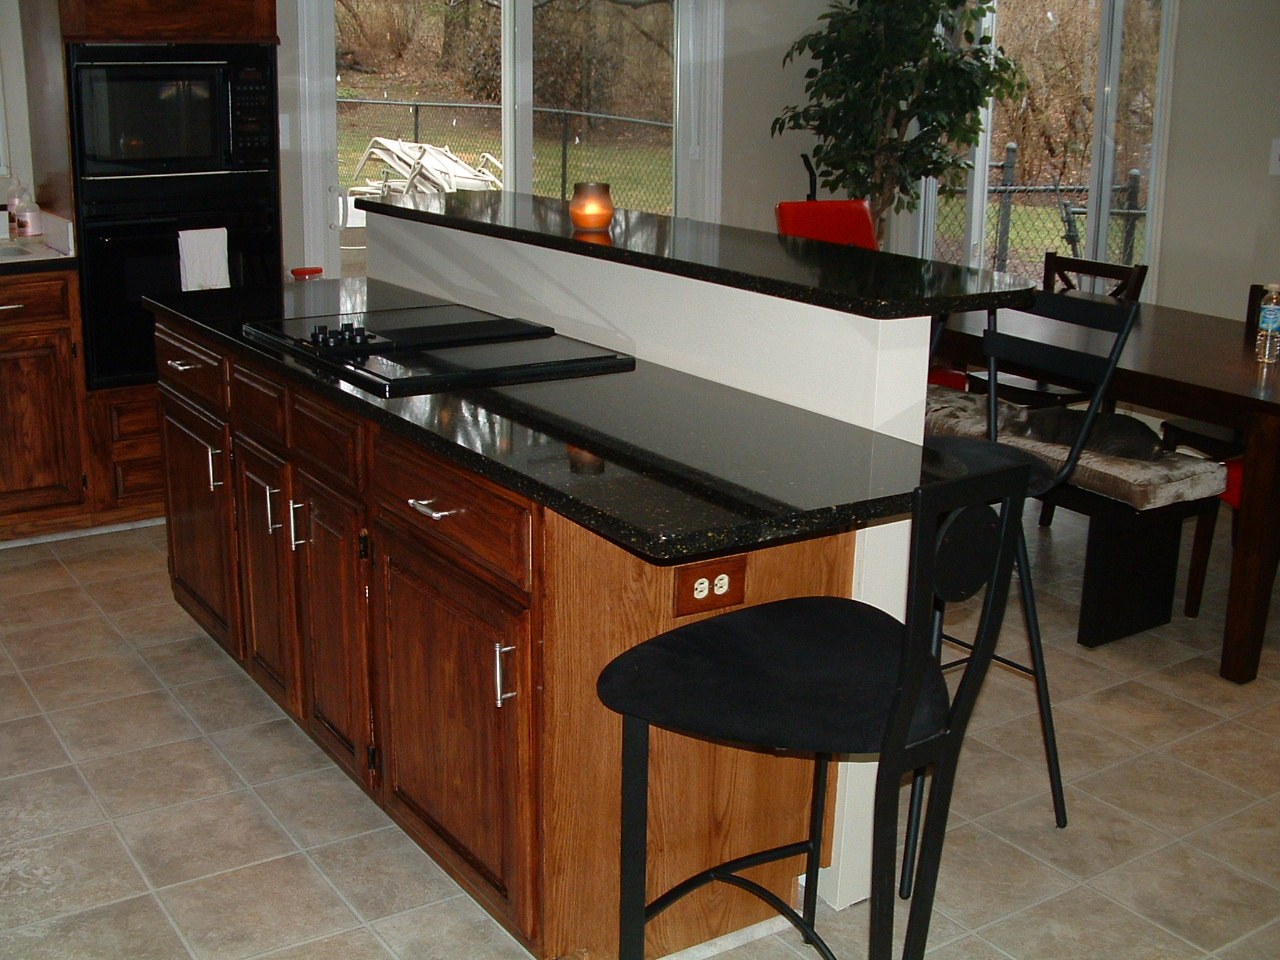 Kitchen Cabinet With Bar Counter
 Tips to Have Sleek and Neat Kitchen Countertop Options